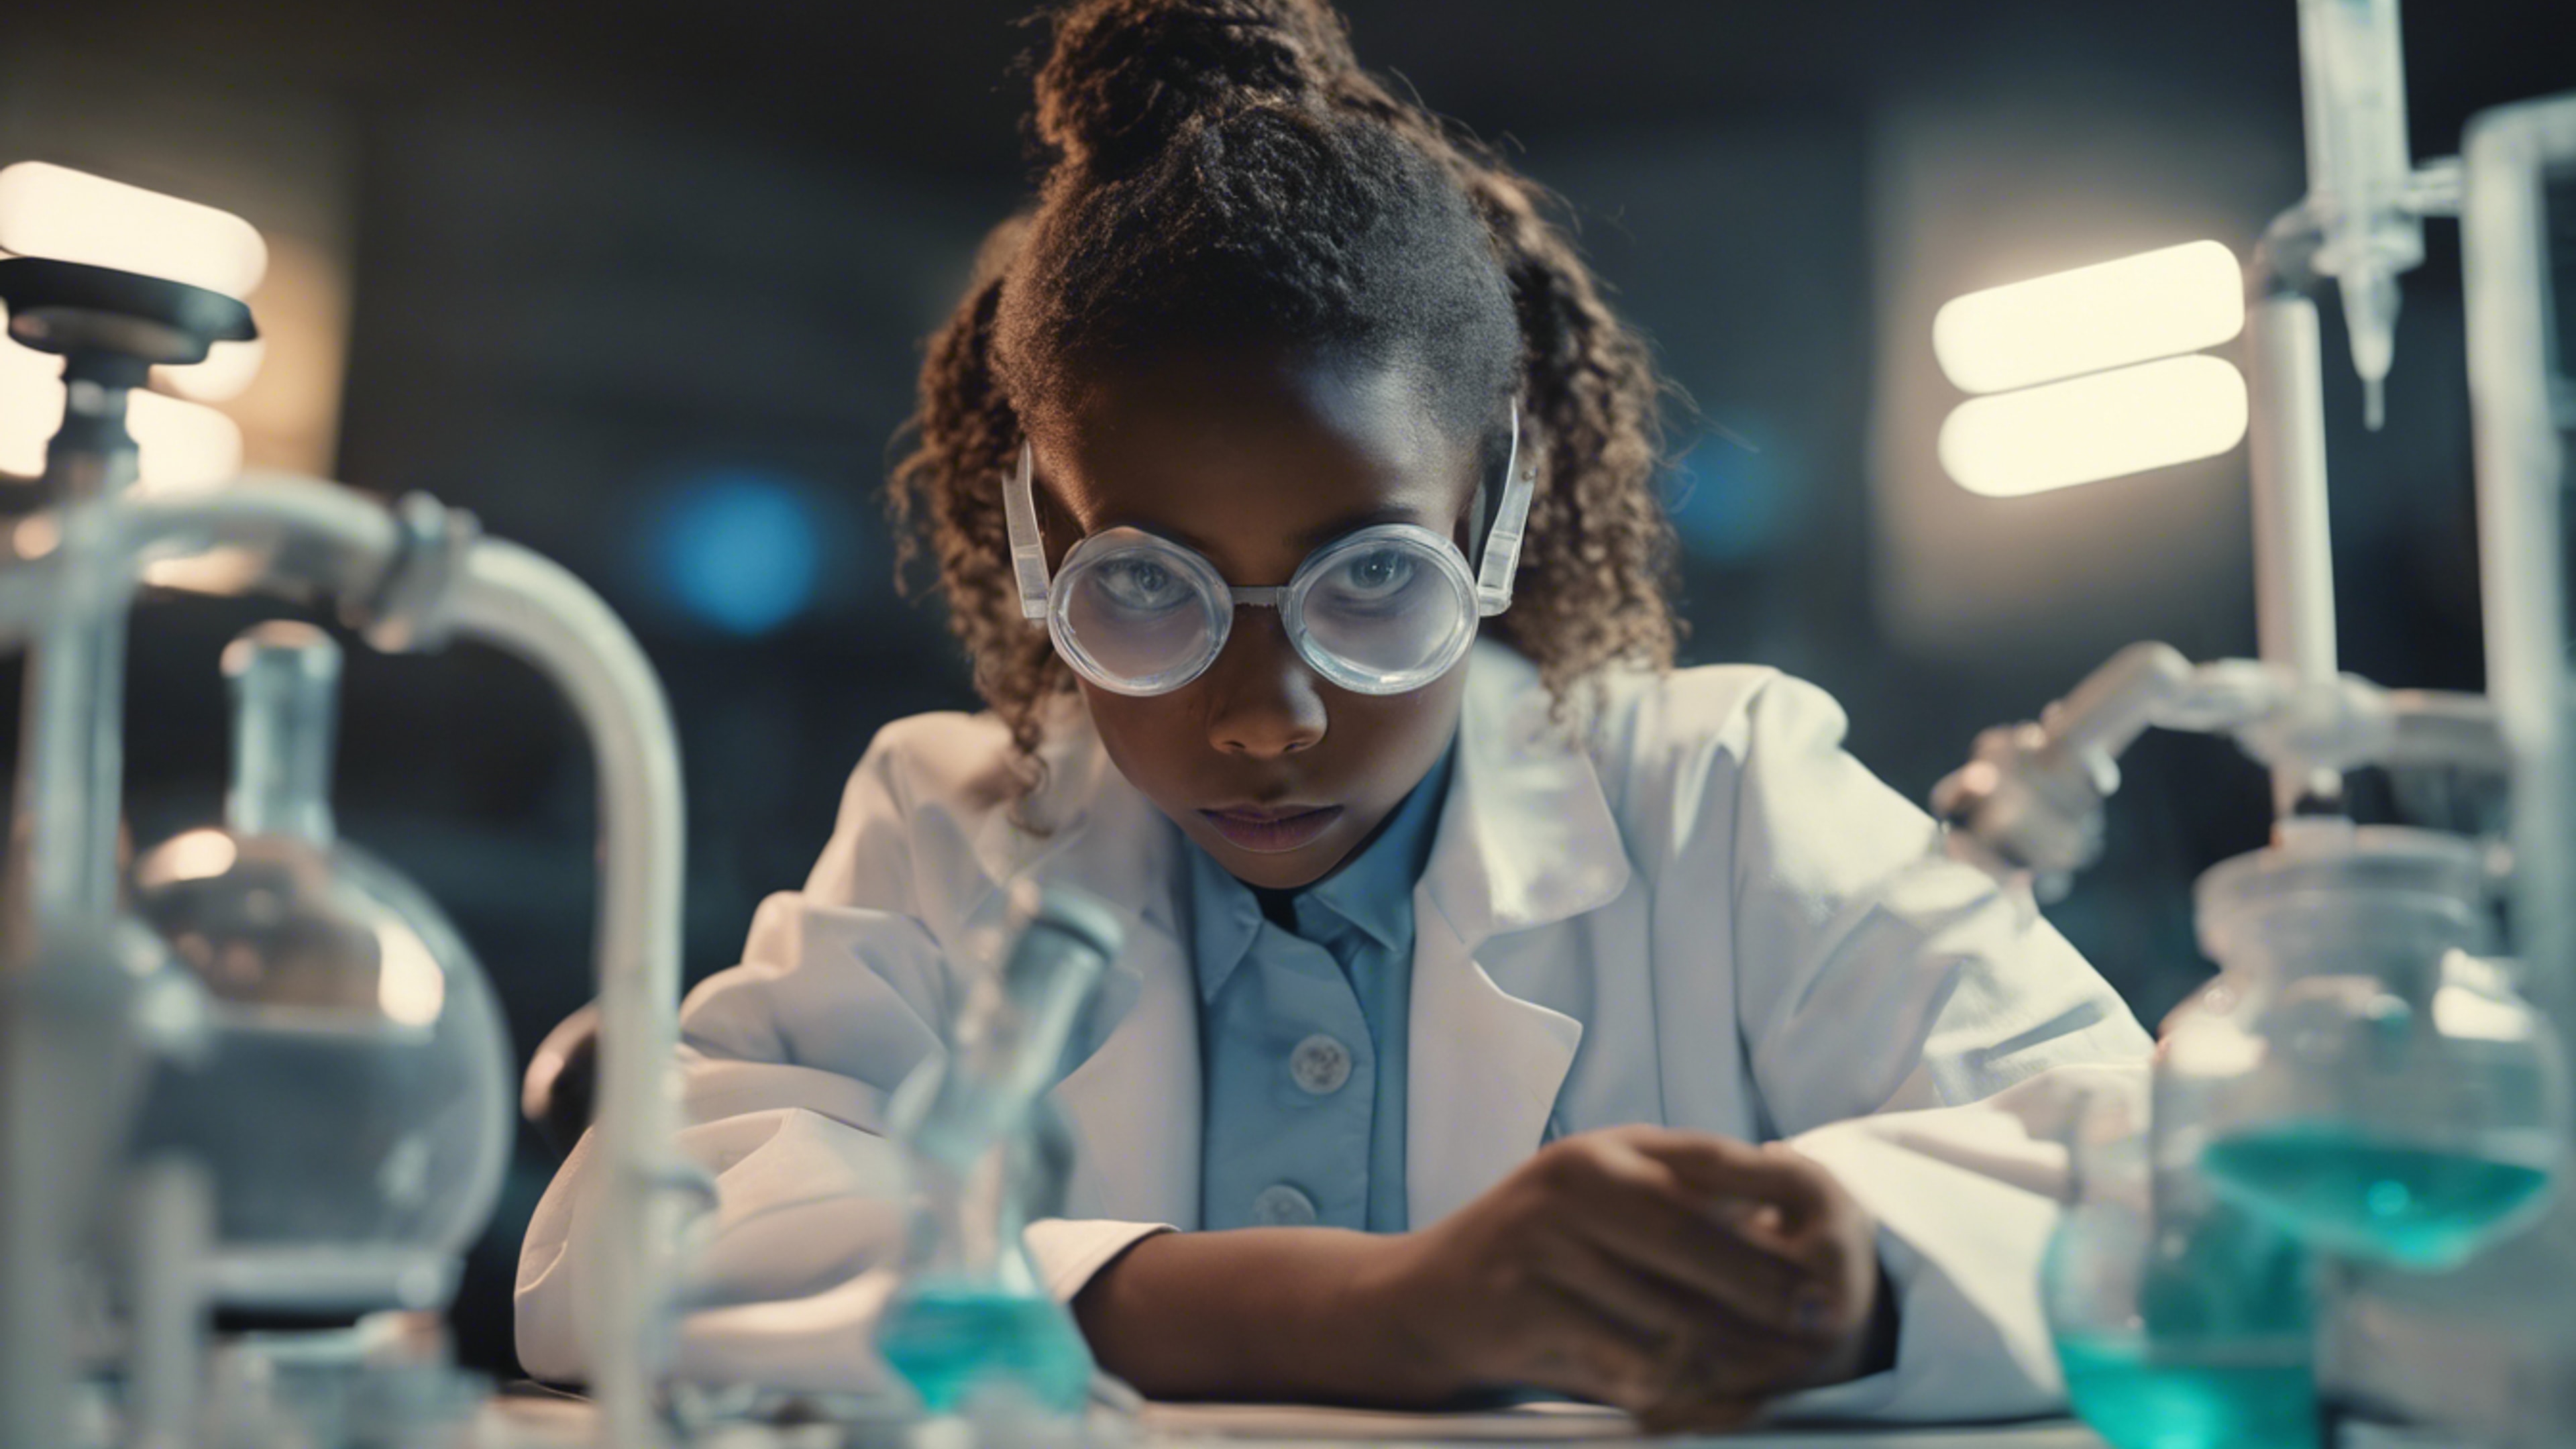 A young black girl wearing goggles and lab coat immersed in doing science experiment. duvar kağıdı[448c919503a247f79693]